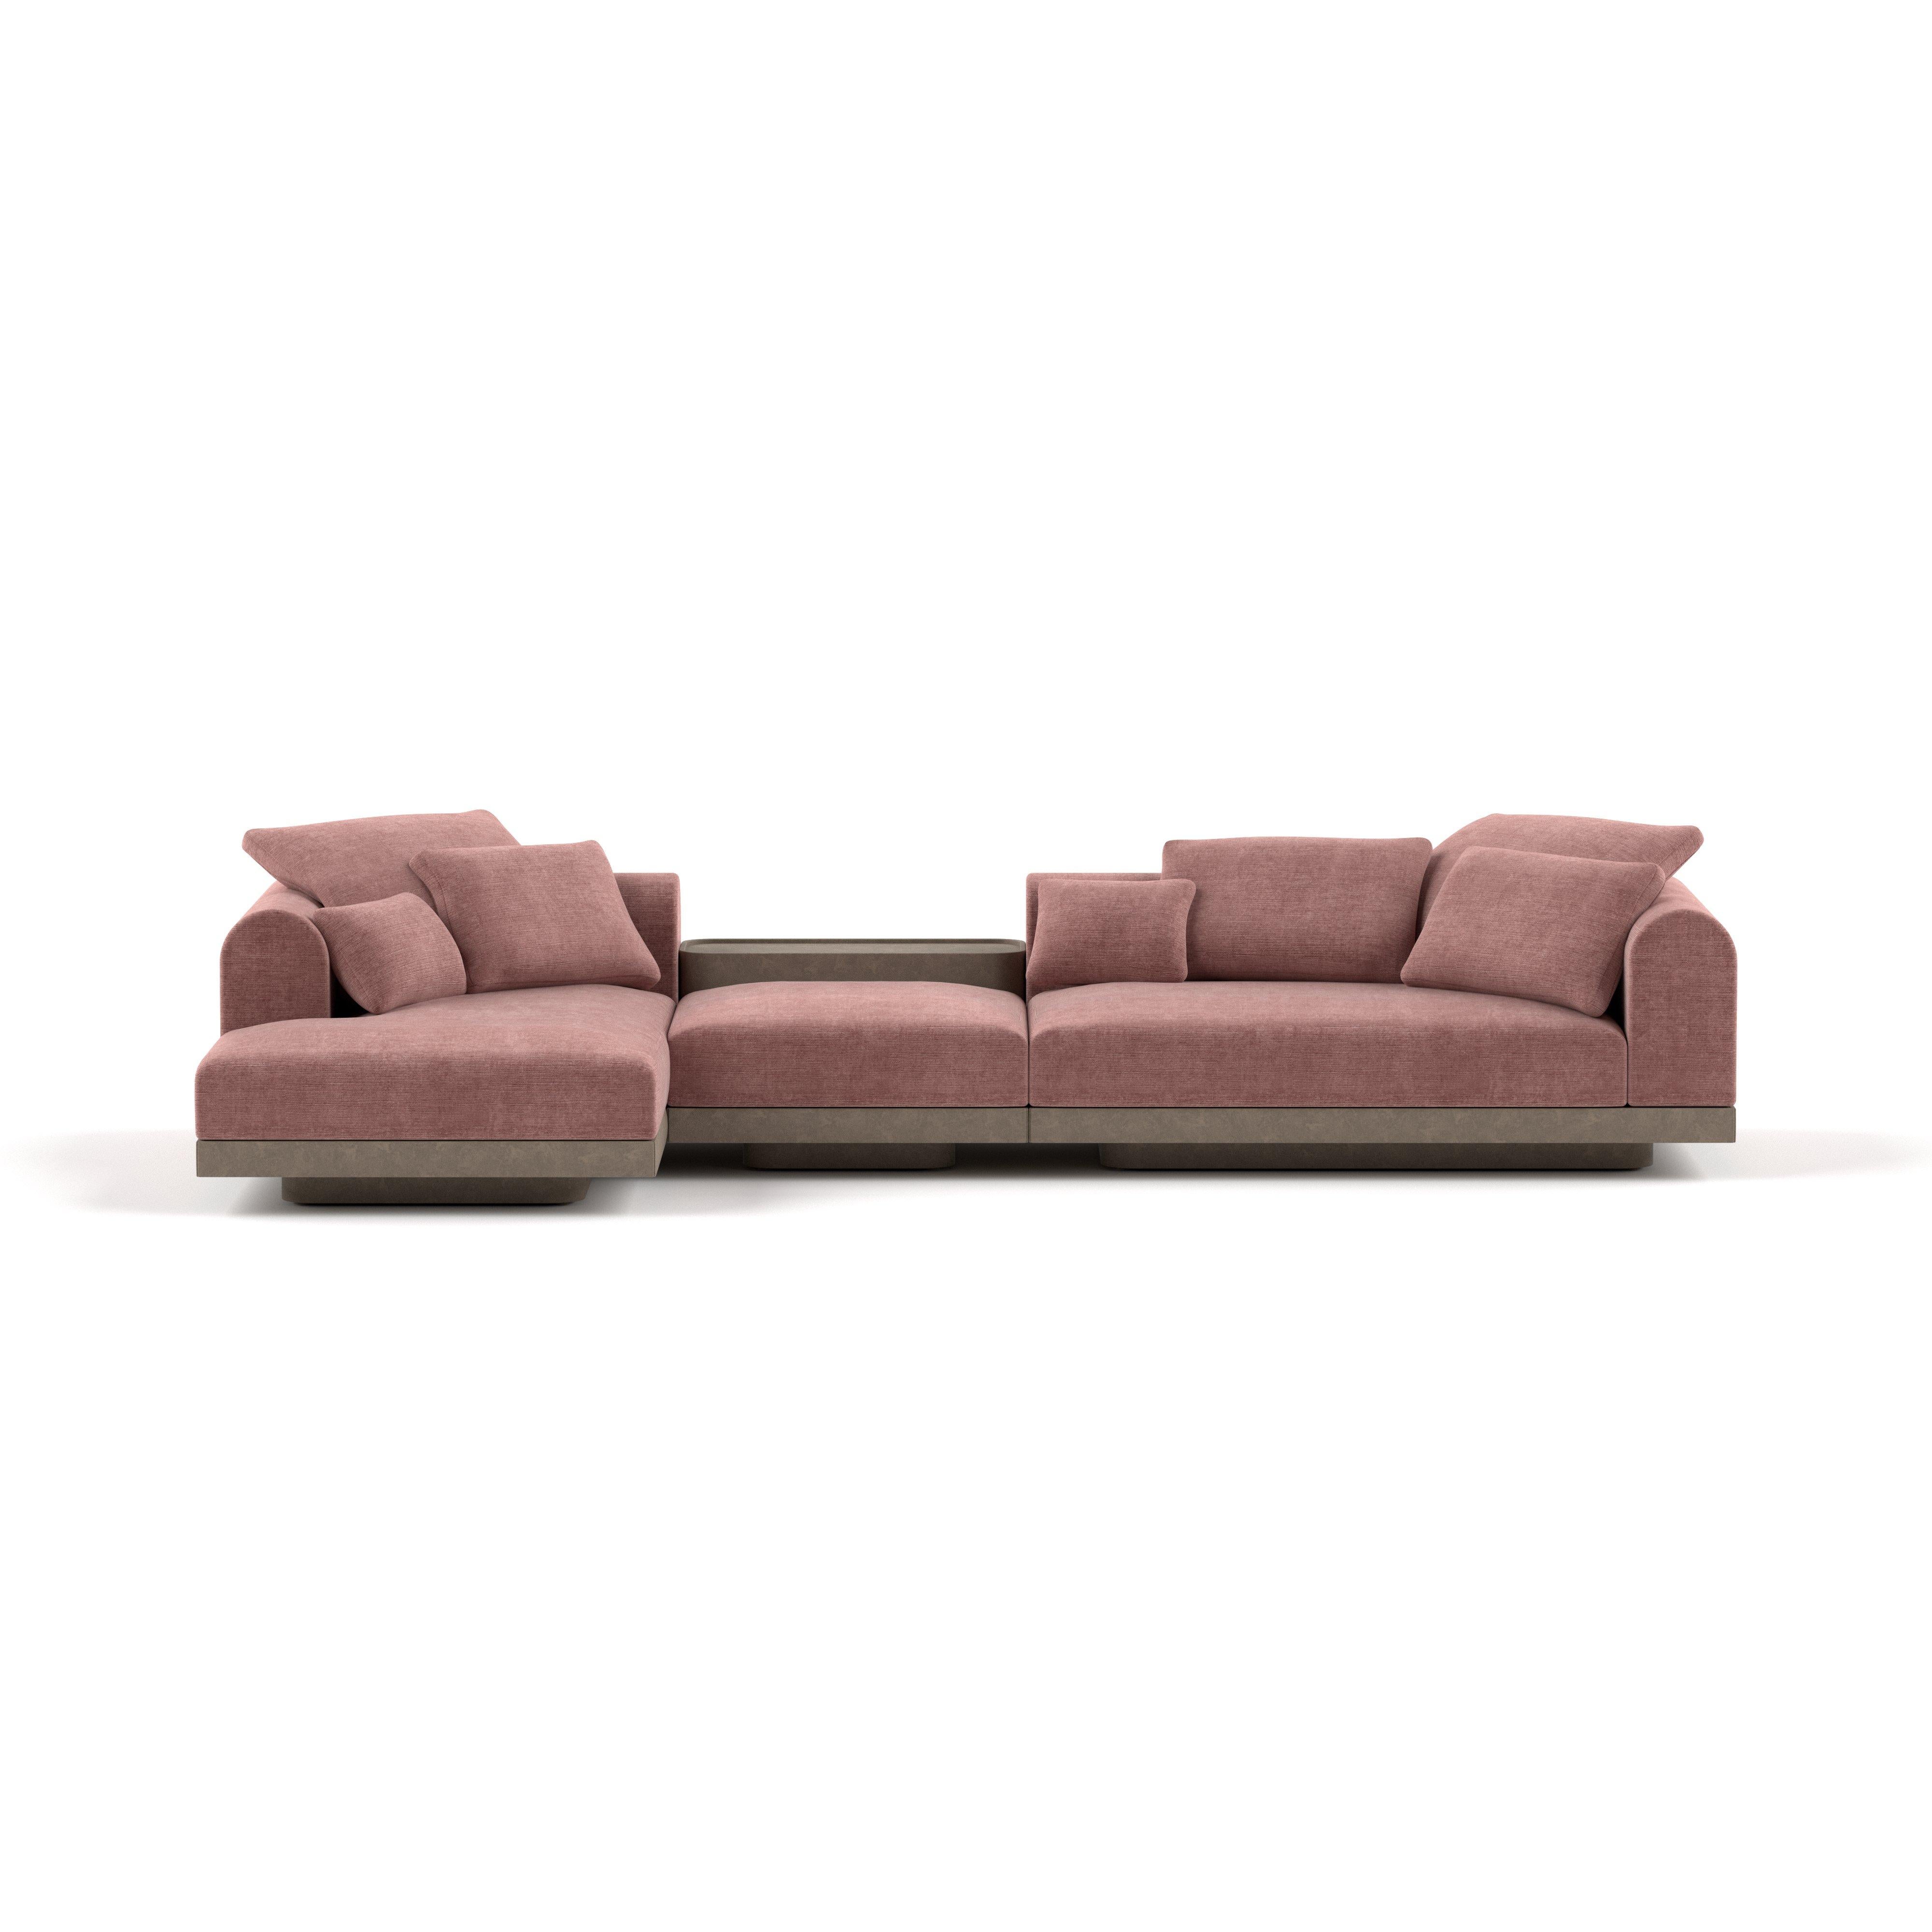 'Aqueduct' Contemporary Sofa by Poiat, Setup 3, Yang 95, High Plinth For Sale 4